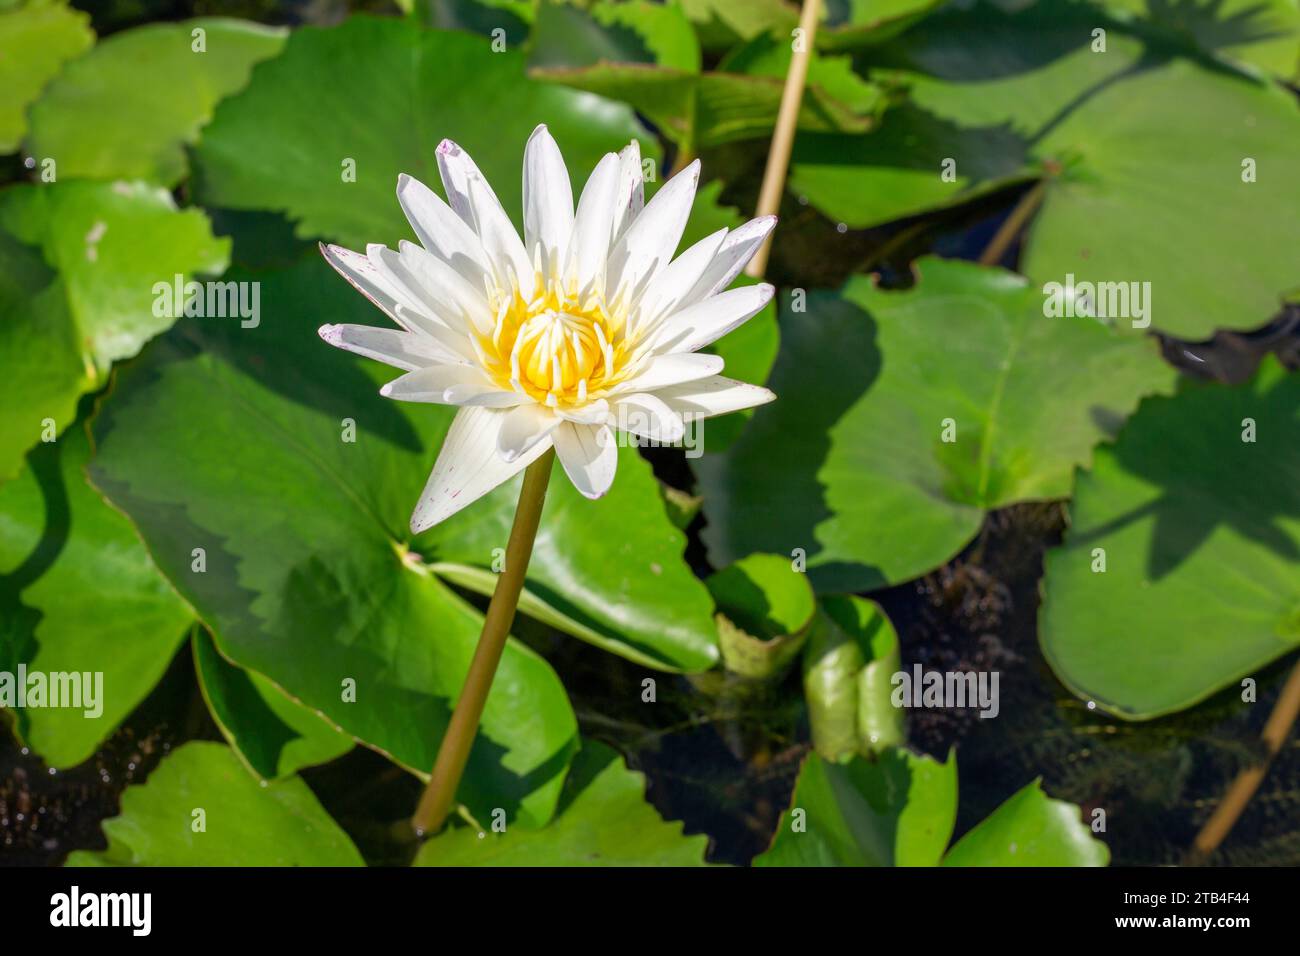 White lotus flower with green leaves on a pond. Stock Photo